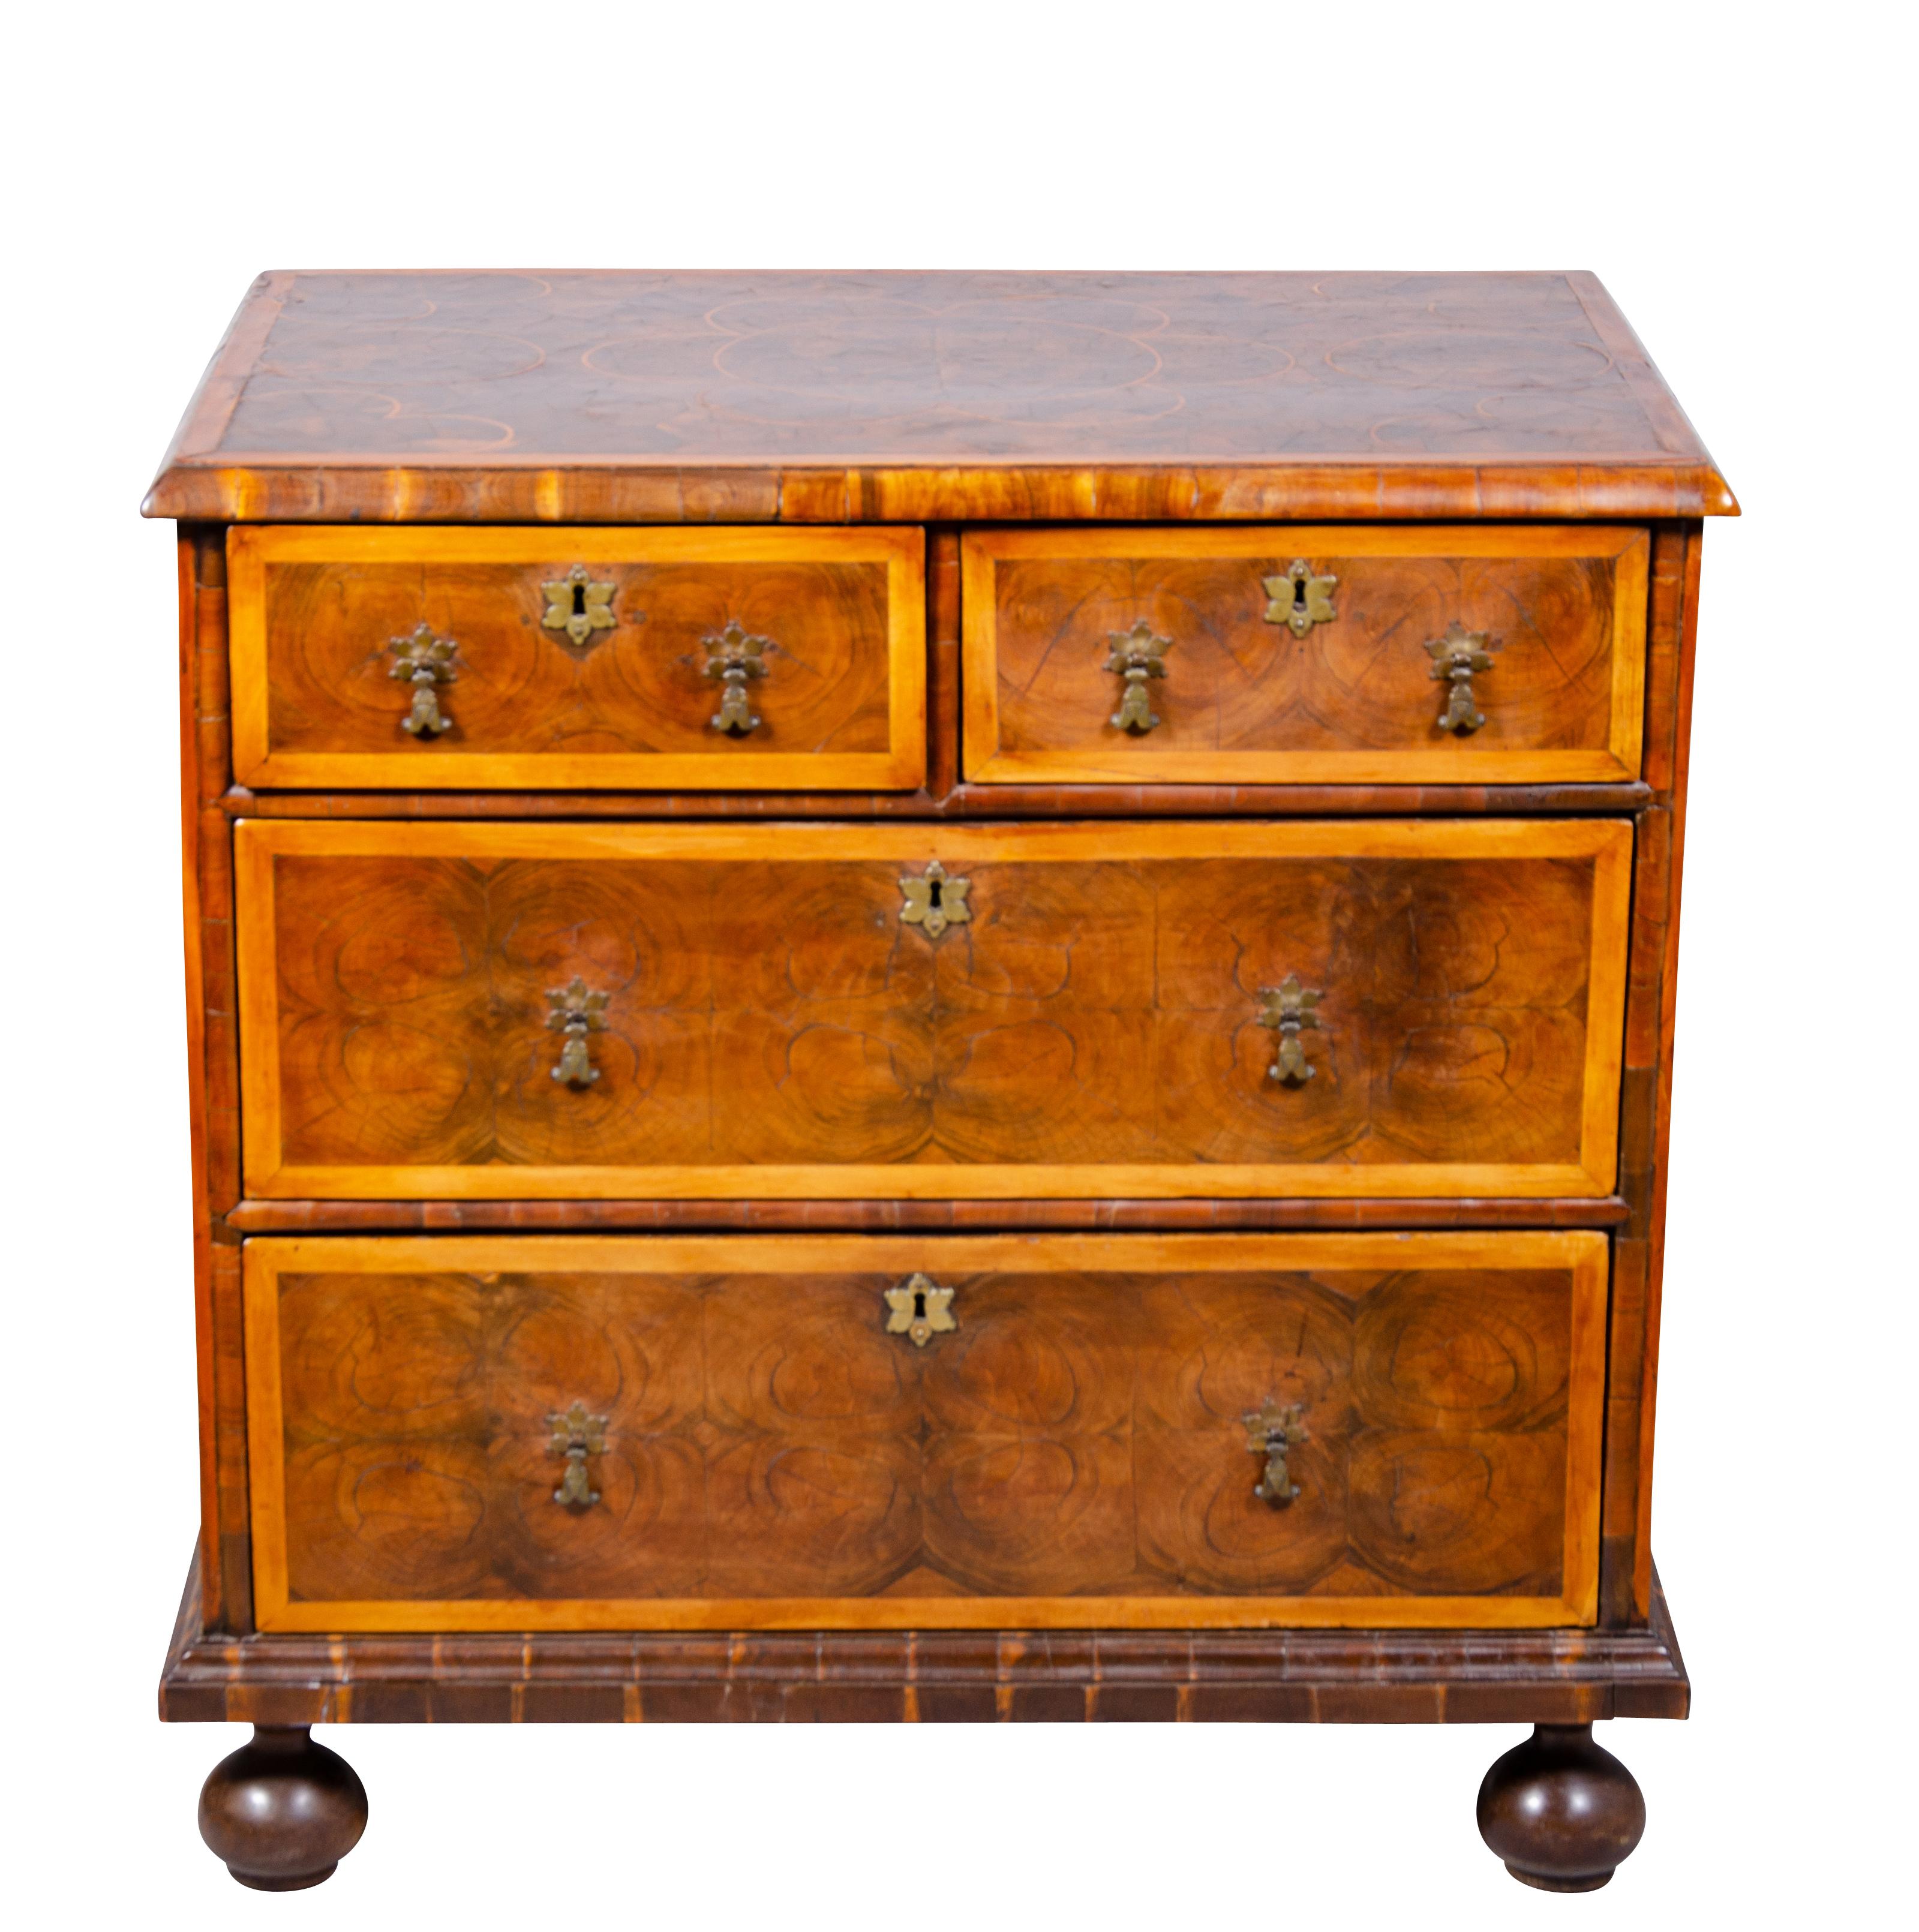 A choice diminutive chest with an oyster veneer top { oyster veneer was highly prized cross sections of tree limbs offering a highly figured design with boxwood stringing to divide the design. with two short drawers over two long drawers all with